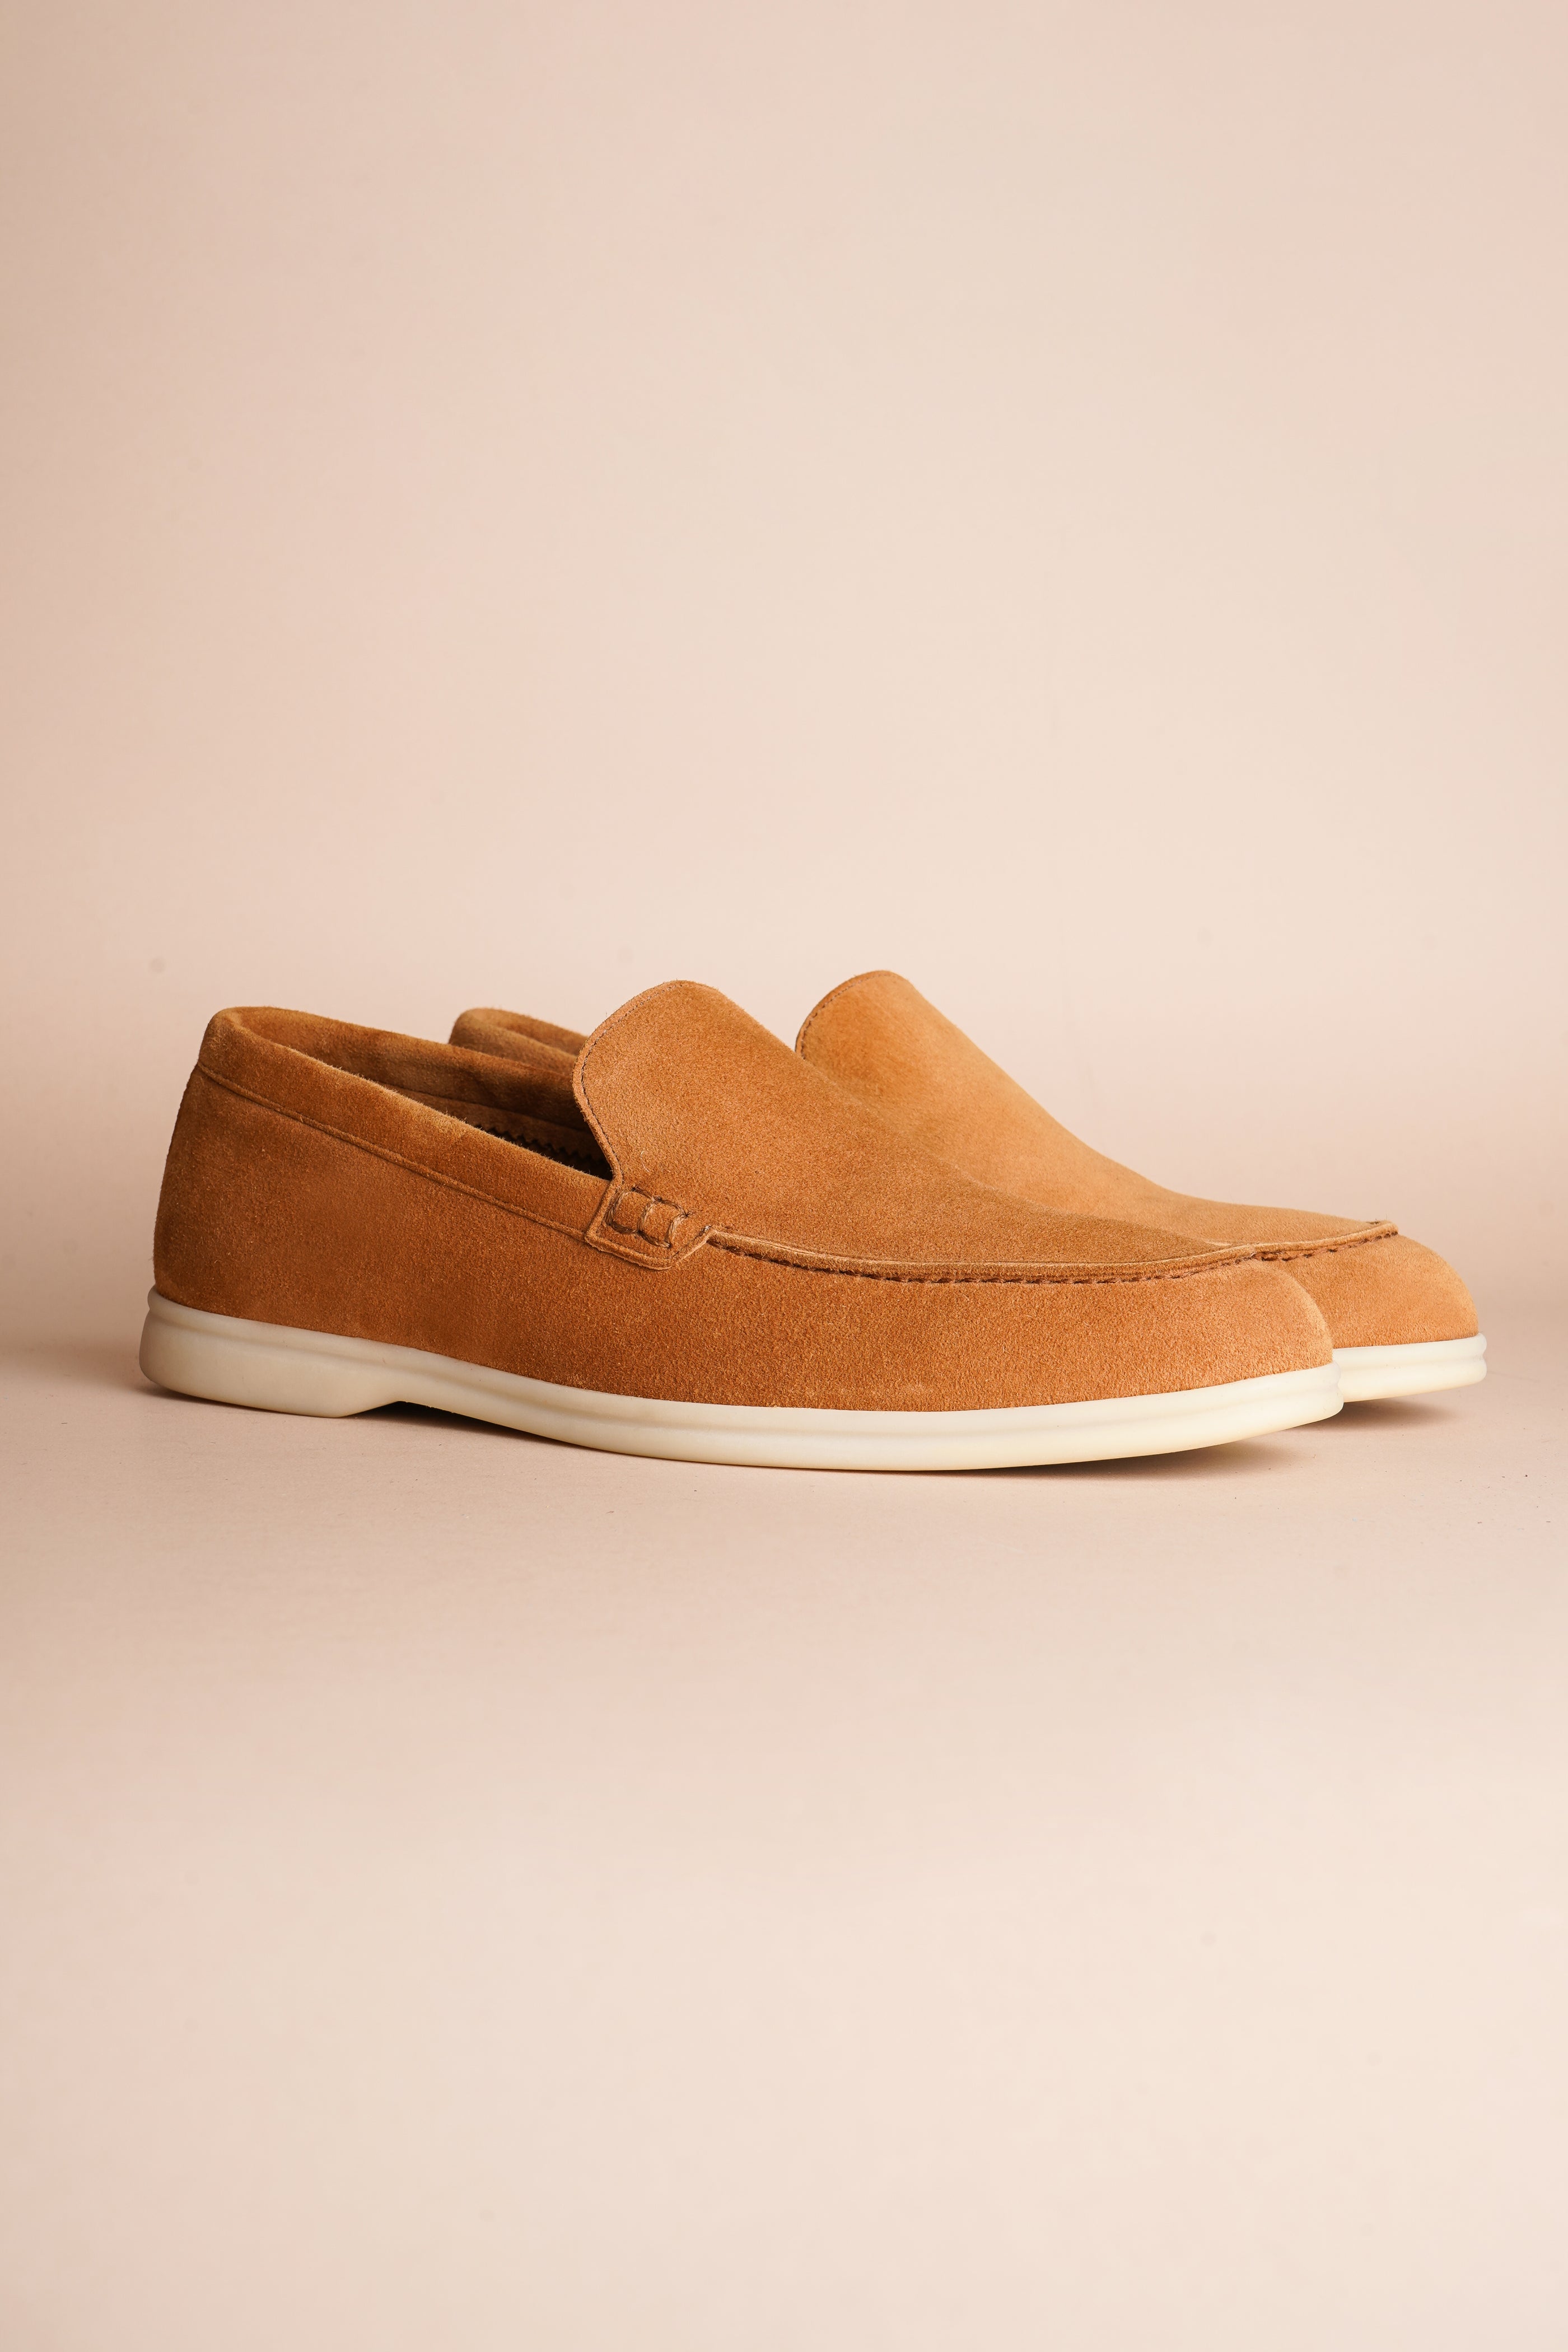 Beaumont Classic Suede Loafers